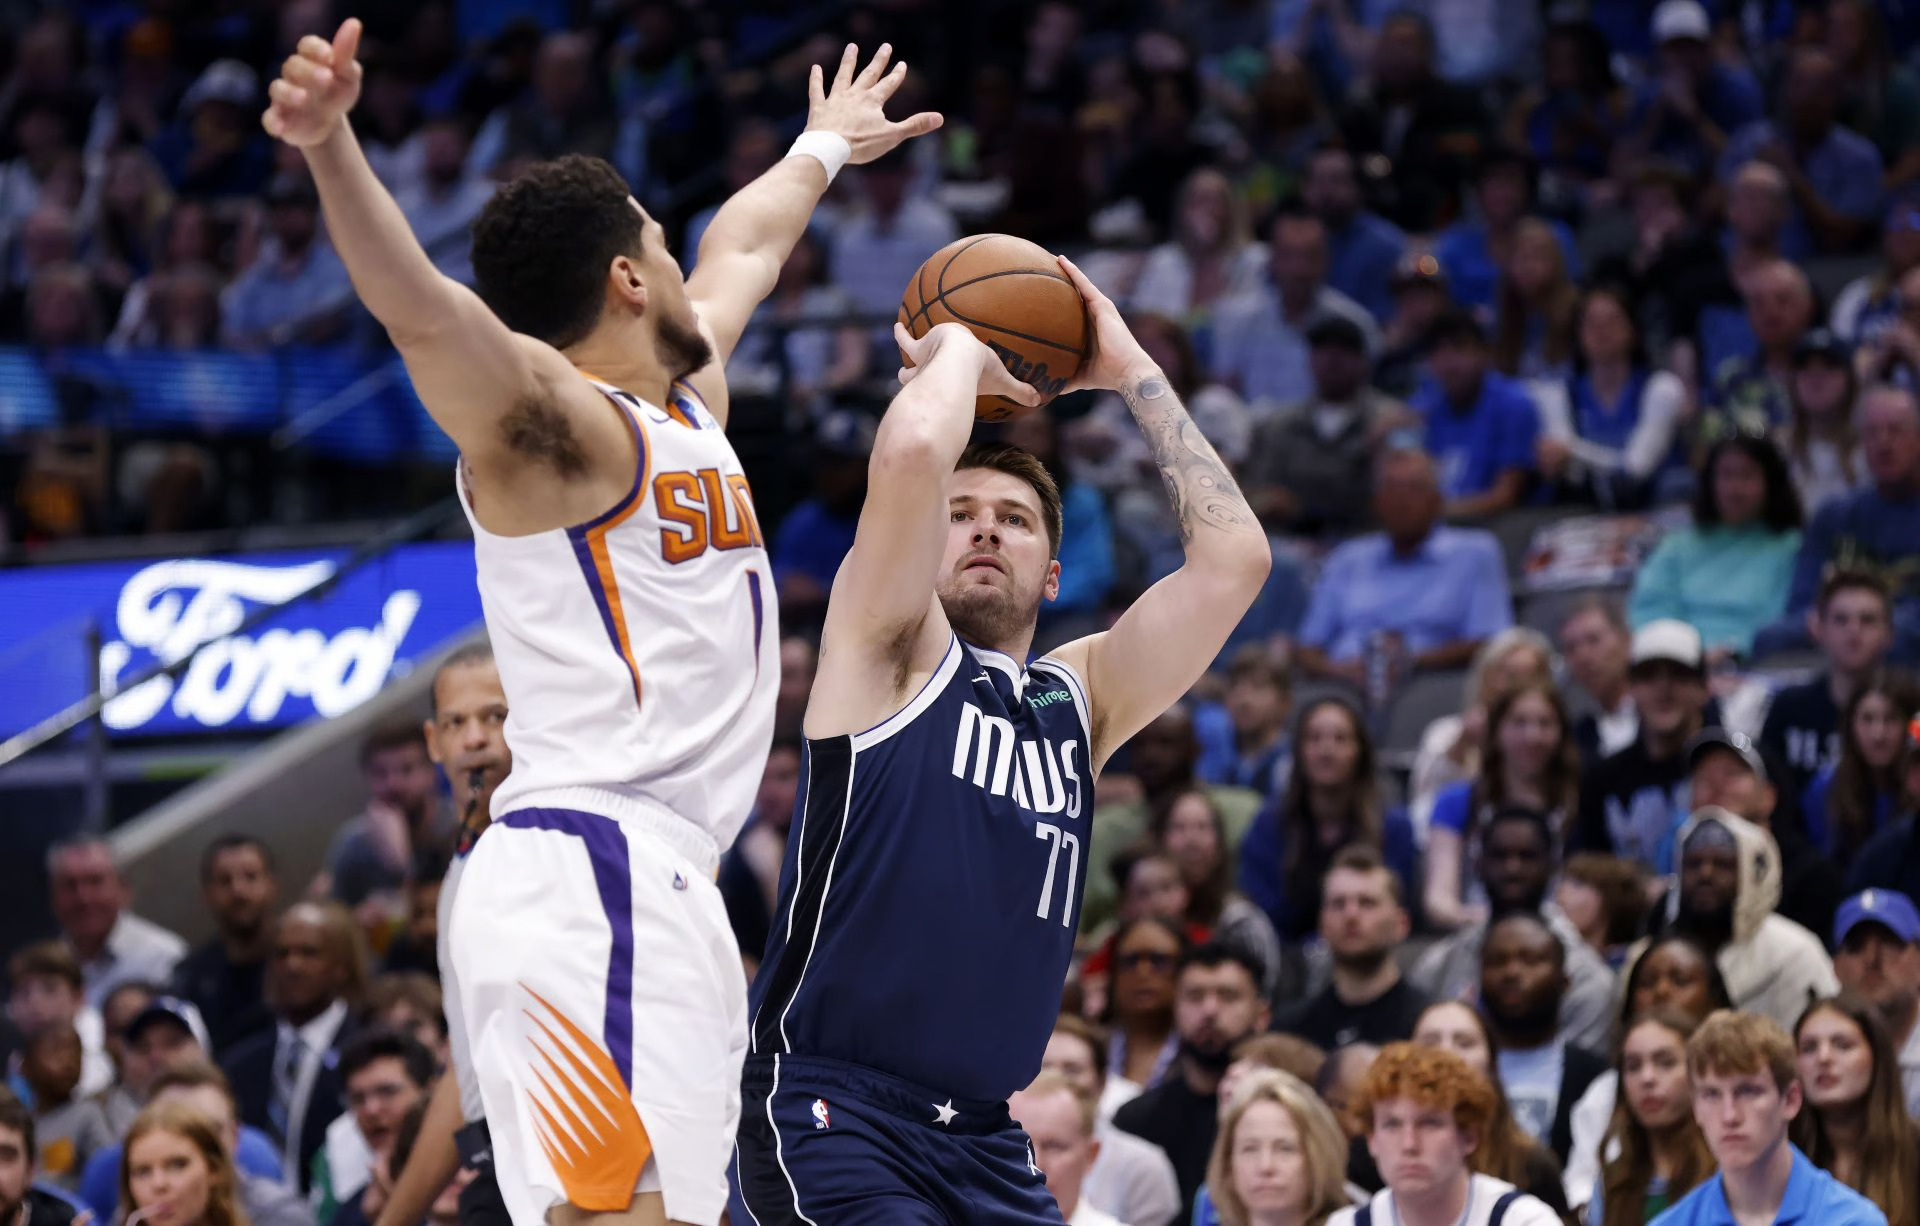 Luka Doncic, Devin Booker exchange words as Suns top Mavs